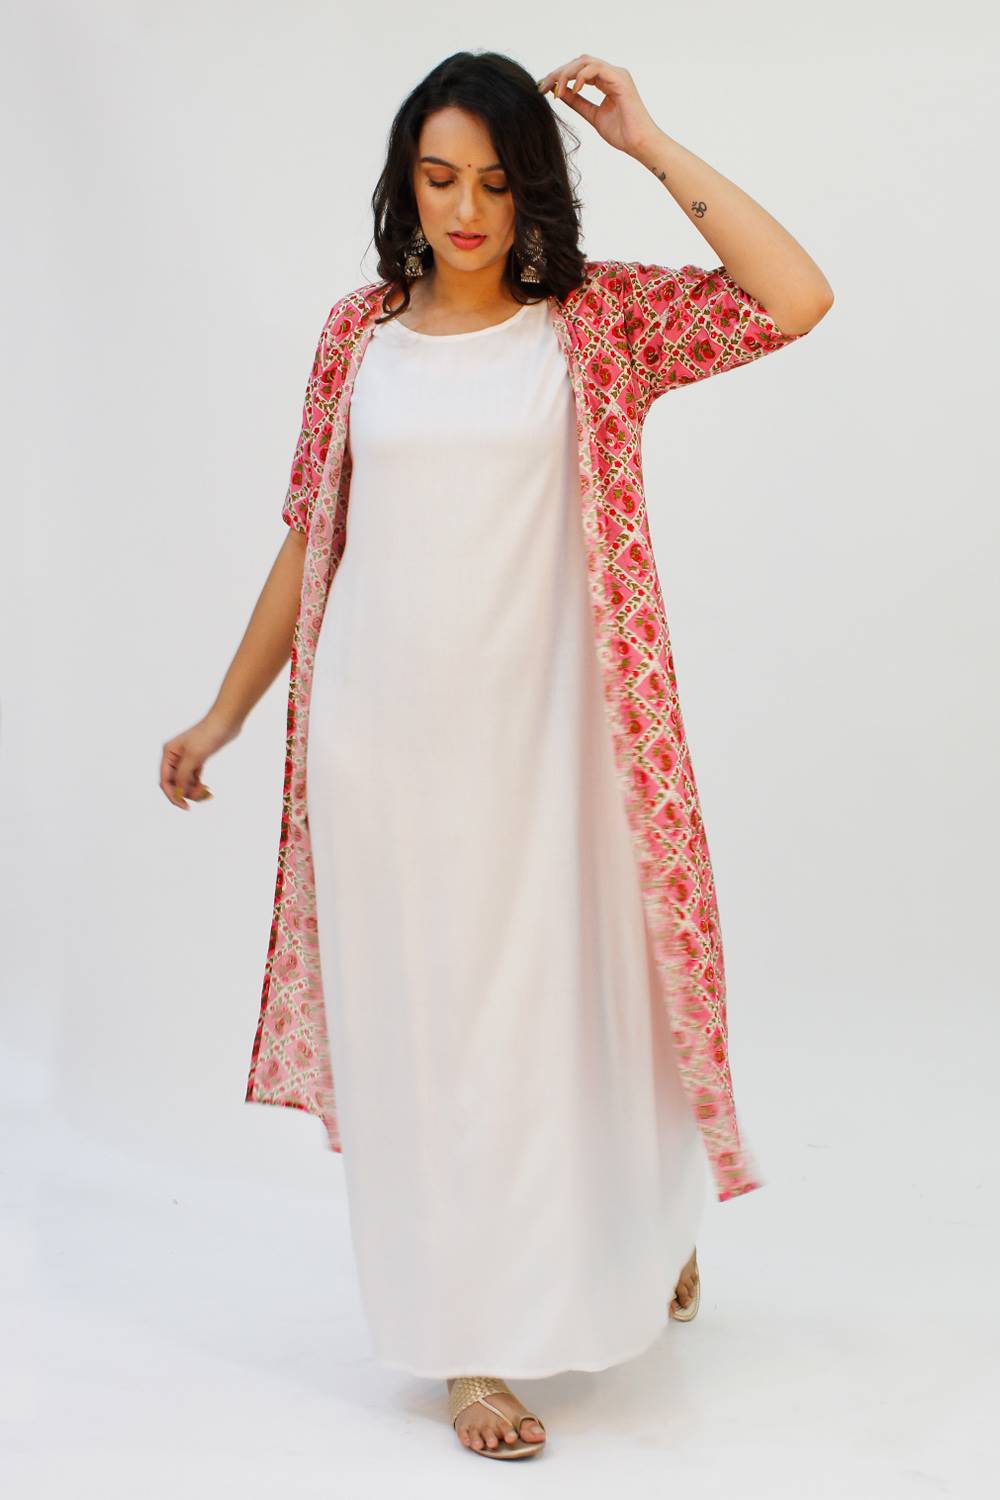 Solid White Maxi Dress With Jacket - LASTINCH